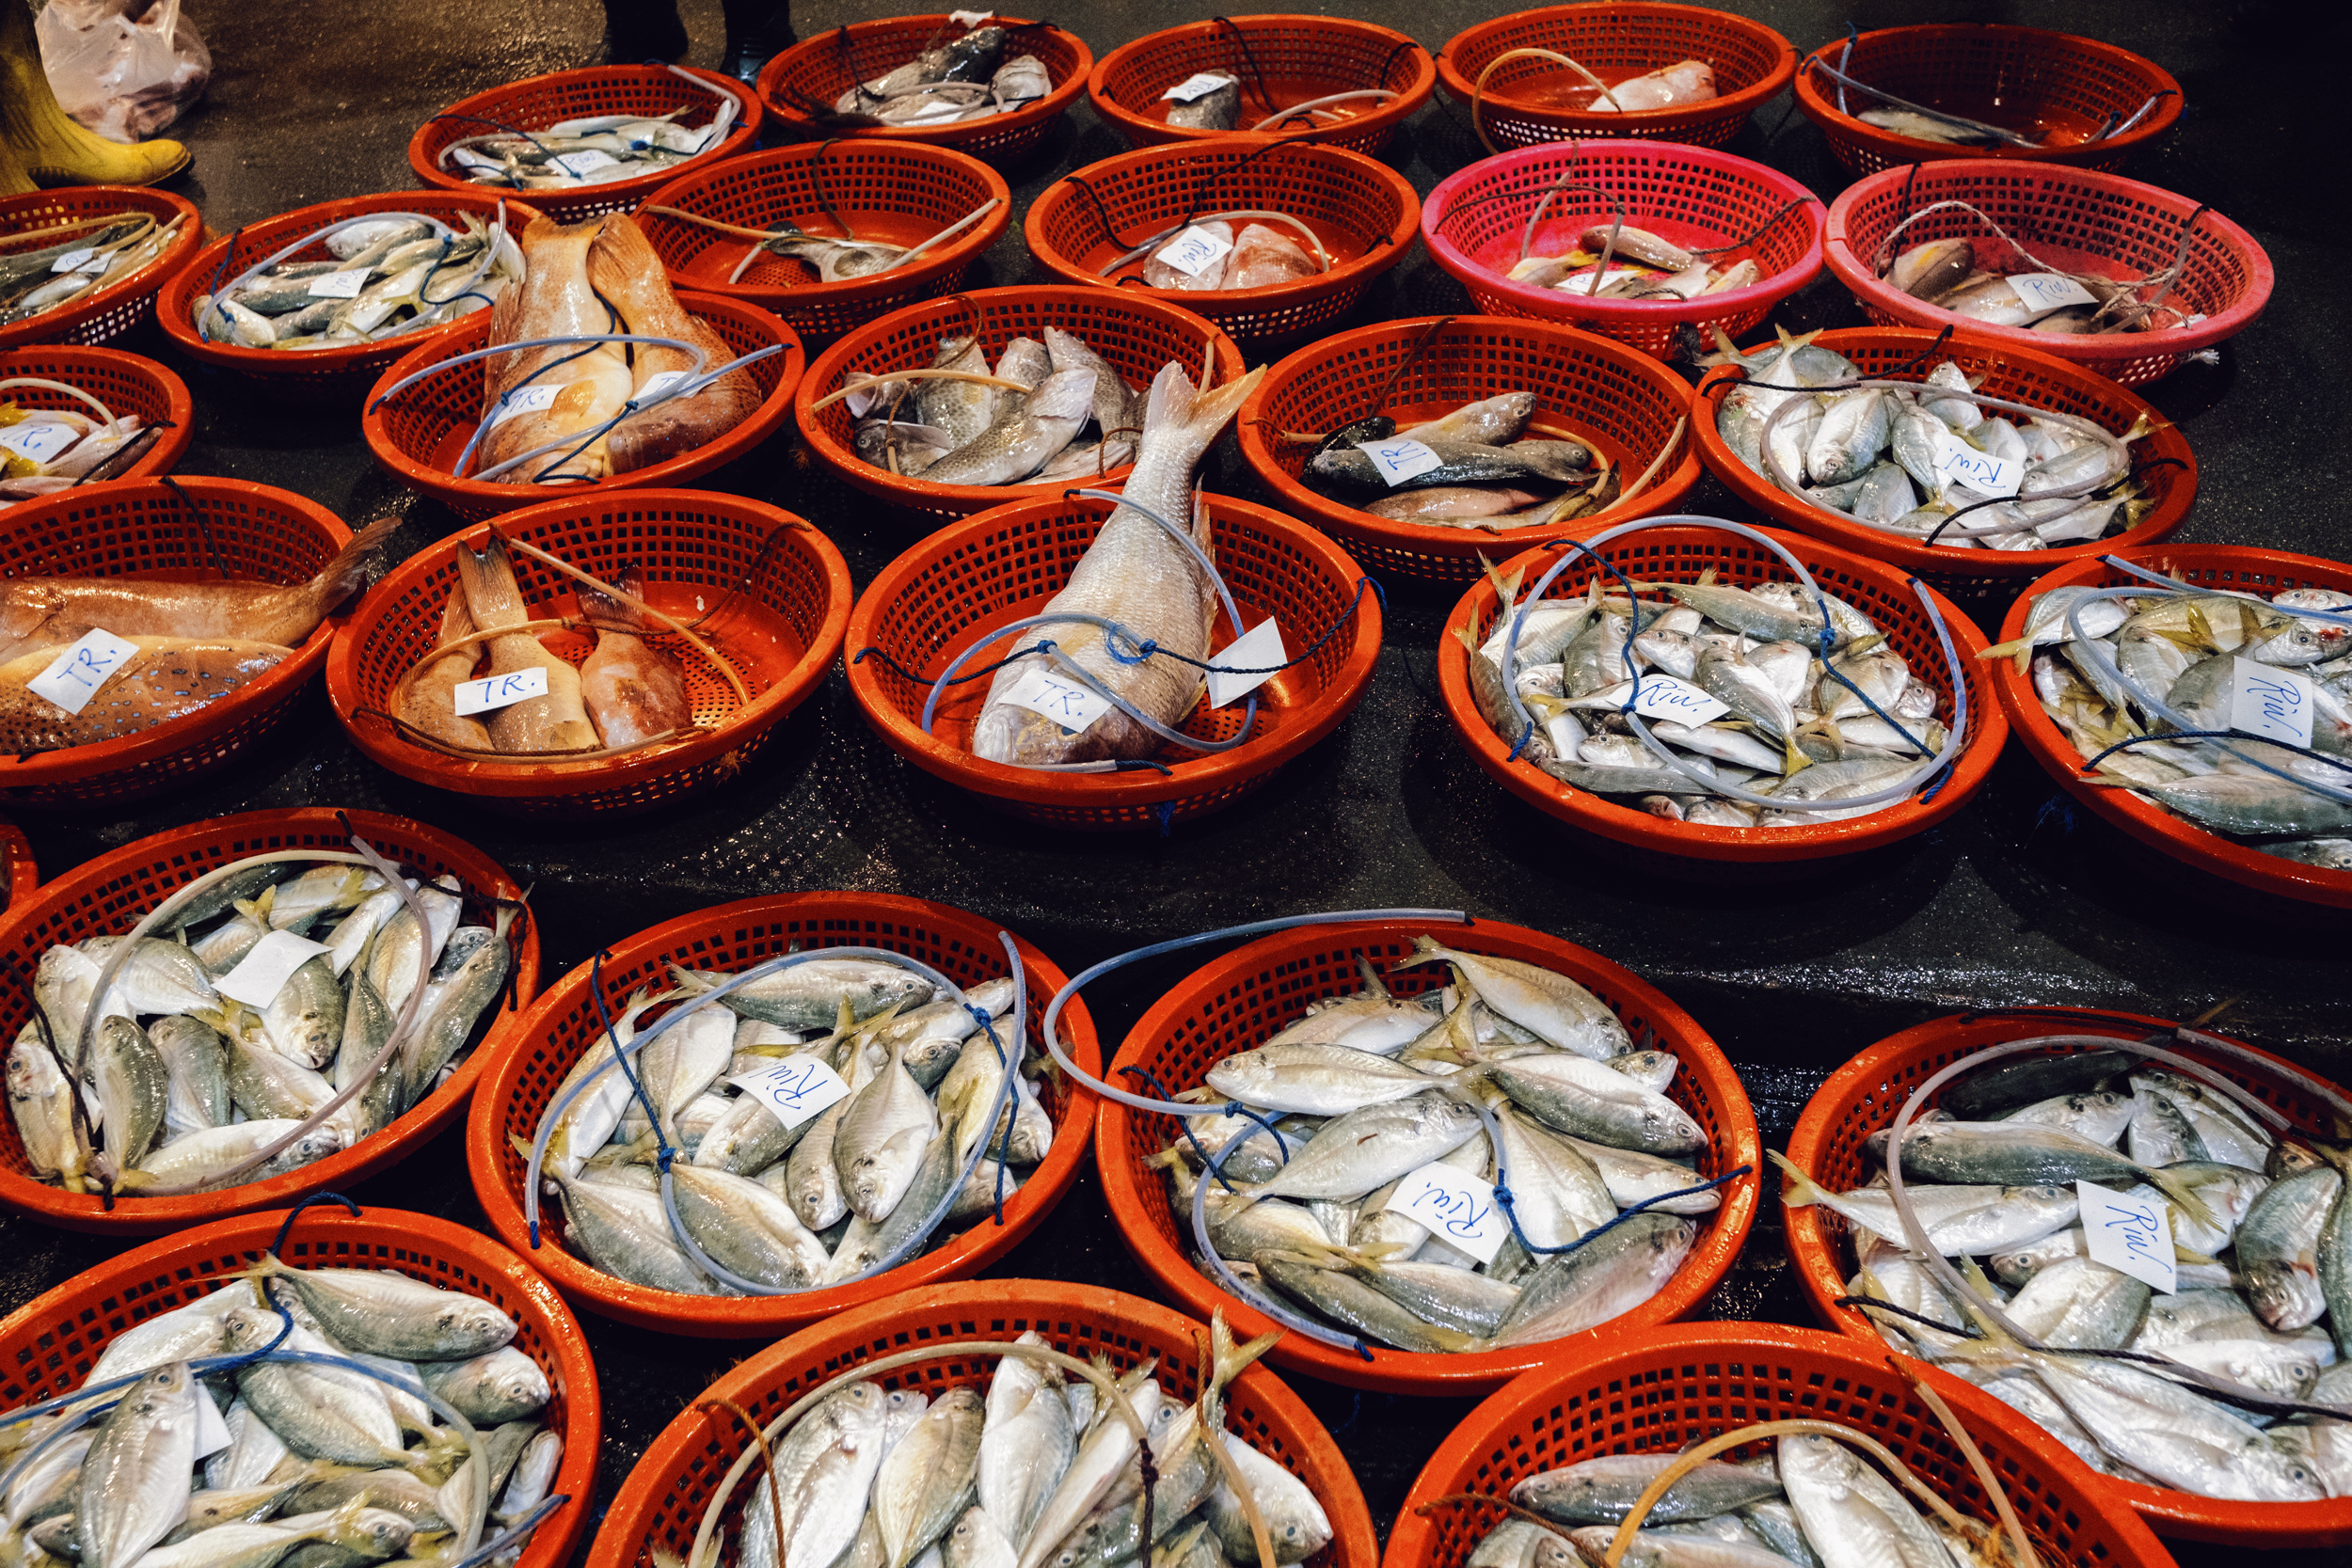 Fish is sorted into baskets.